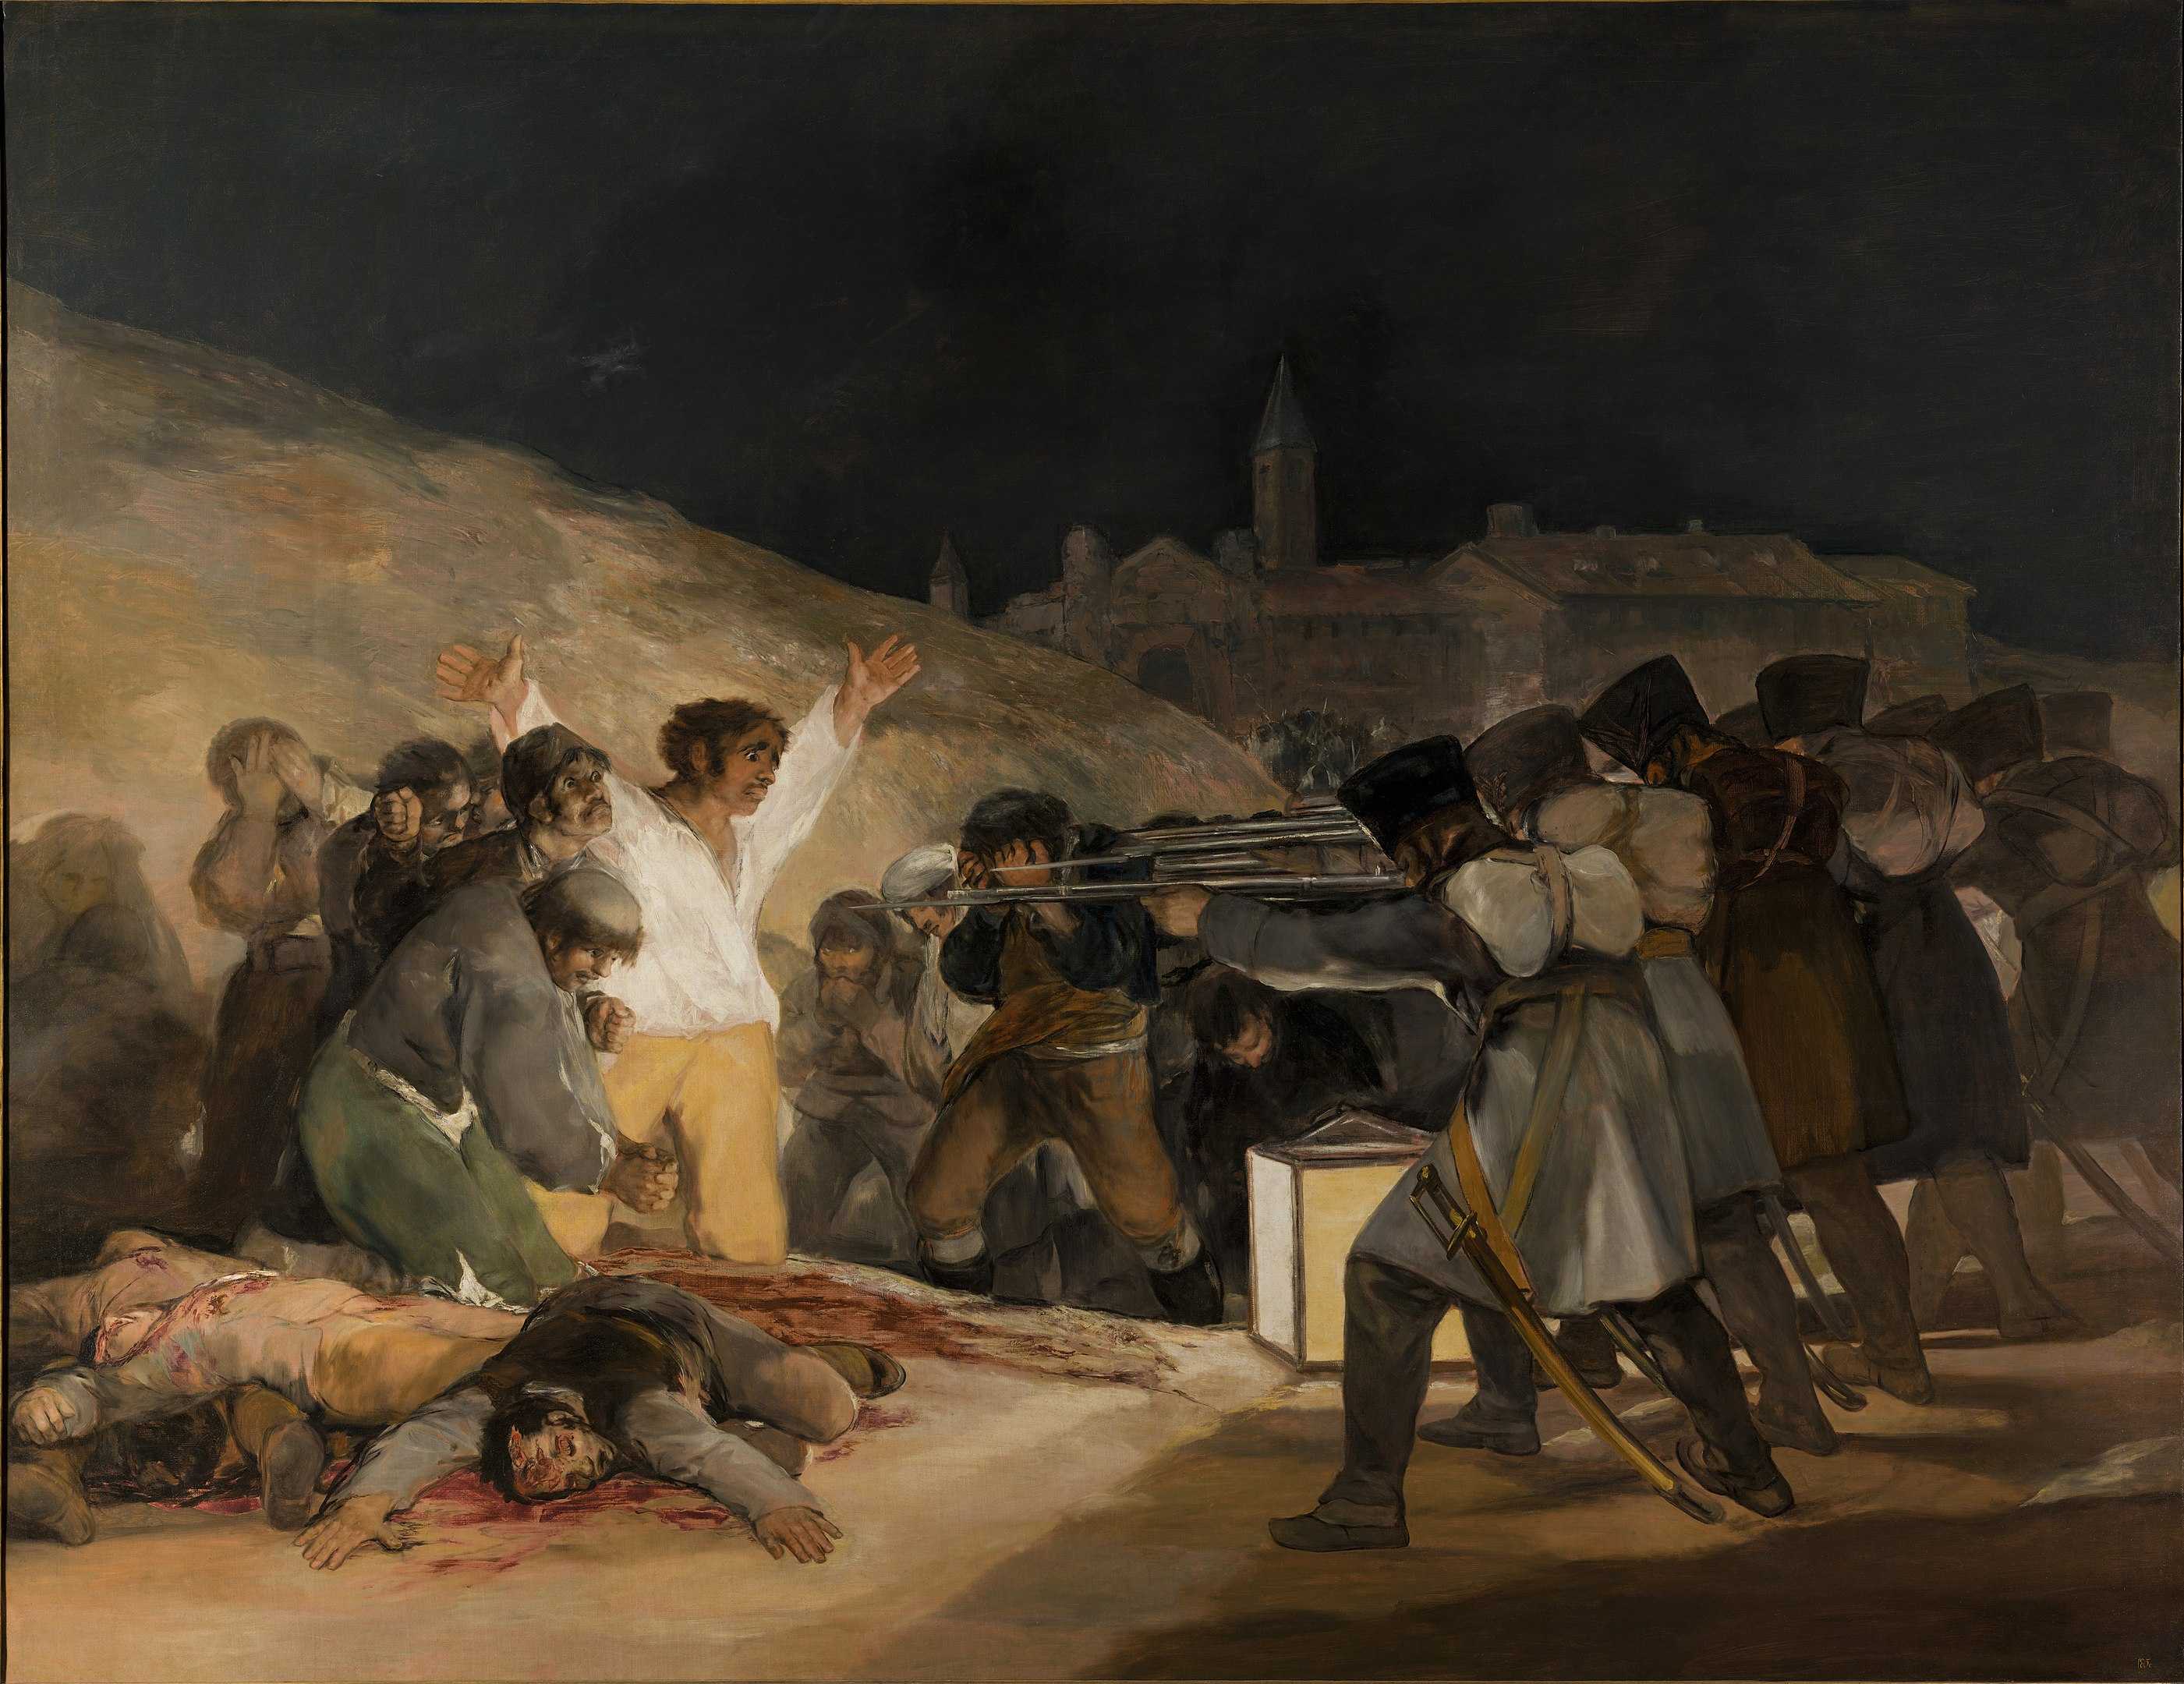 Find out more about Francisco Goya - El Tres de Mayo (The Third of May)